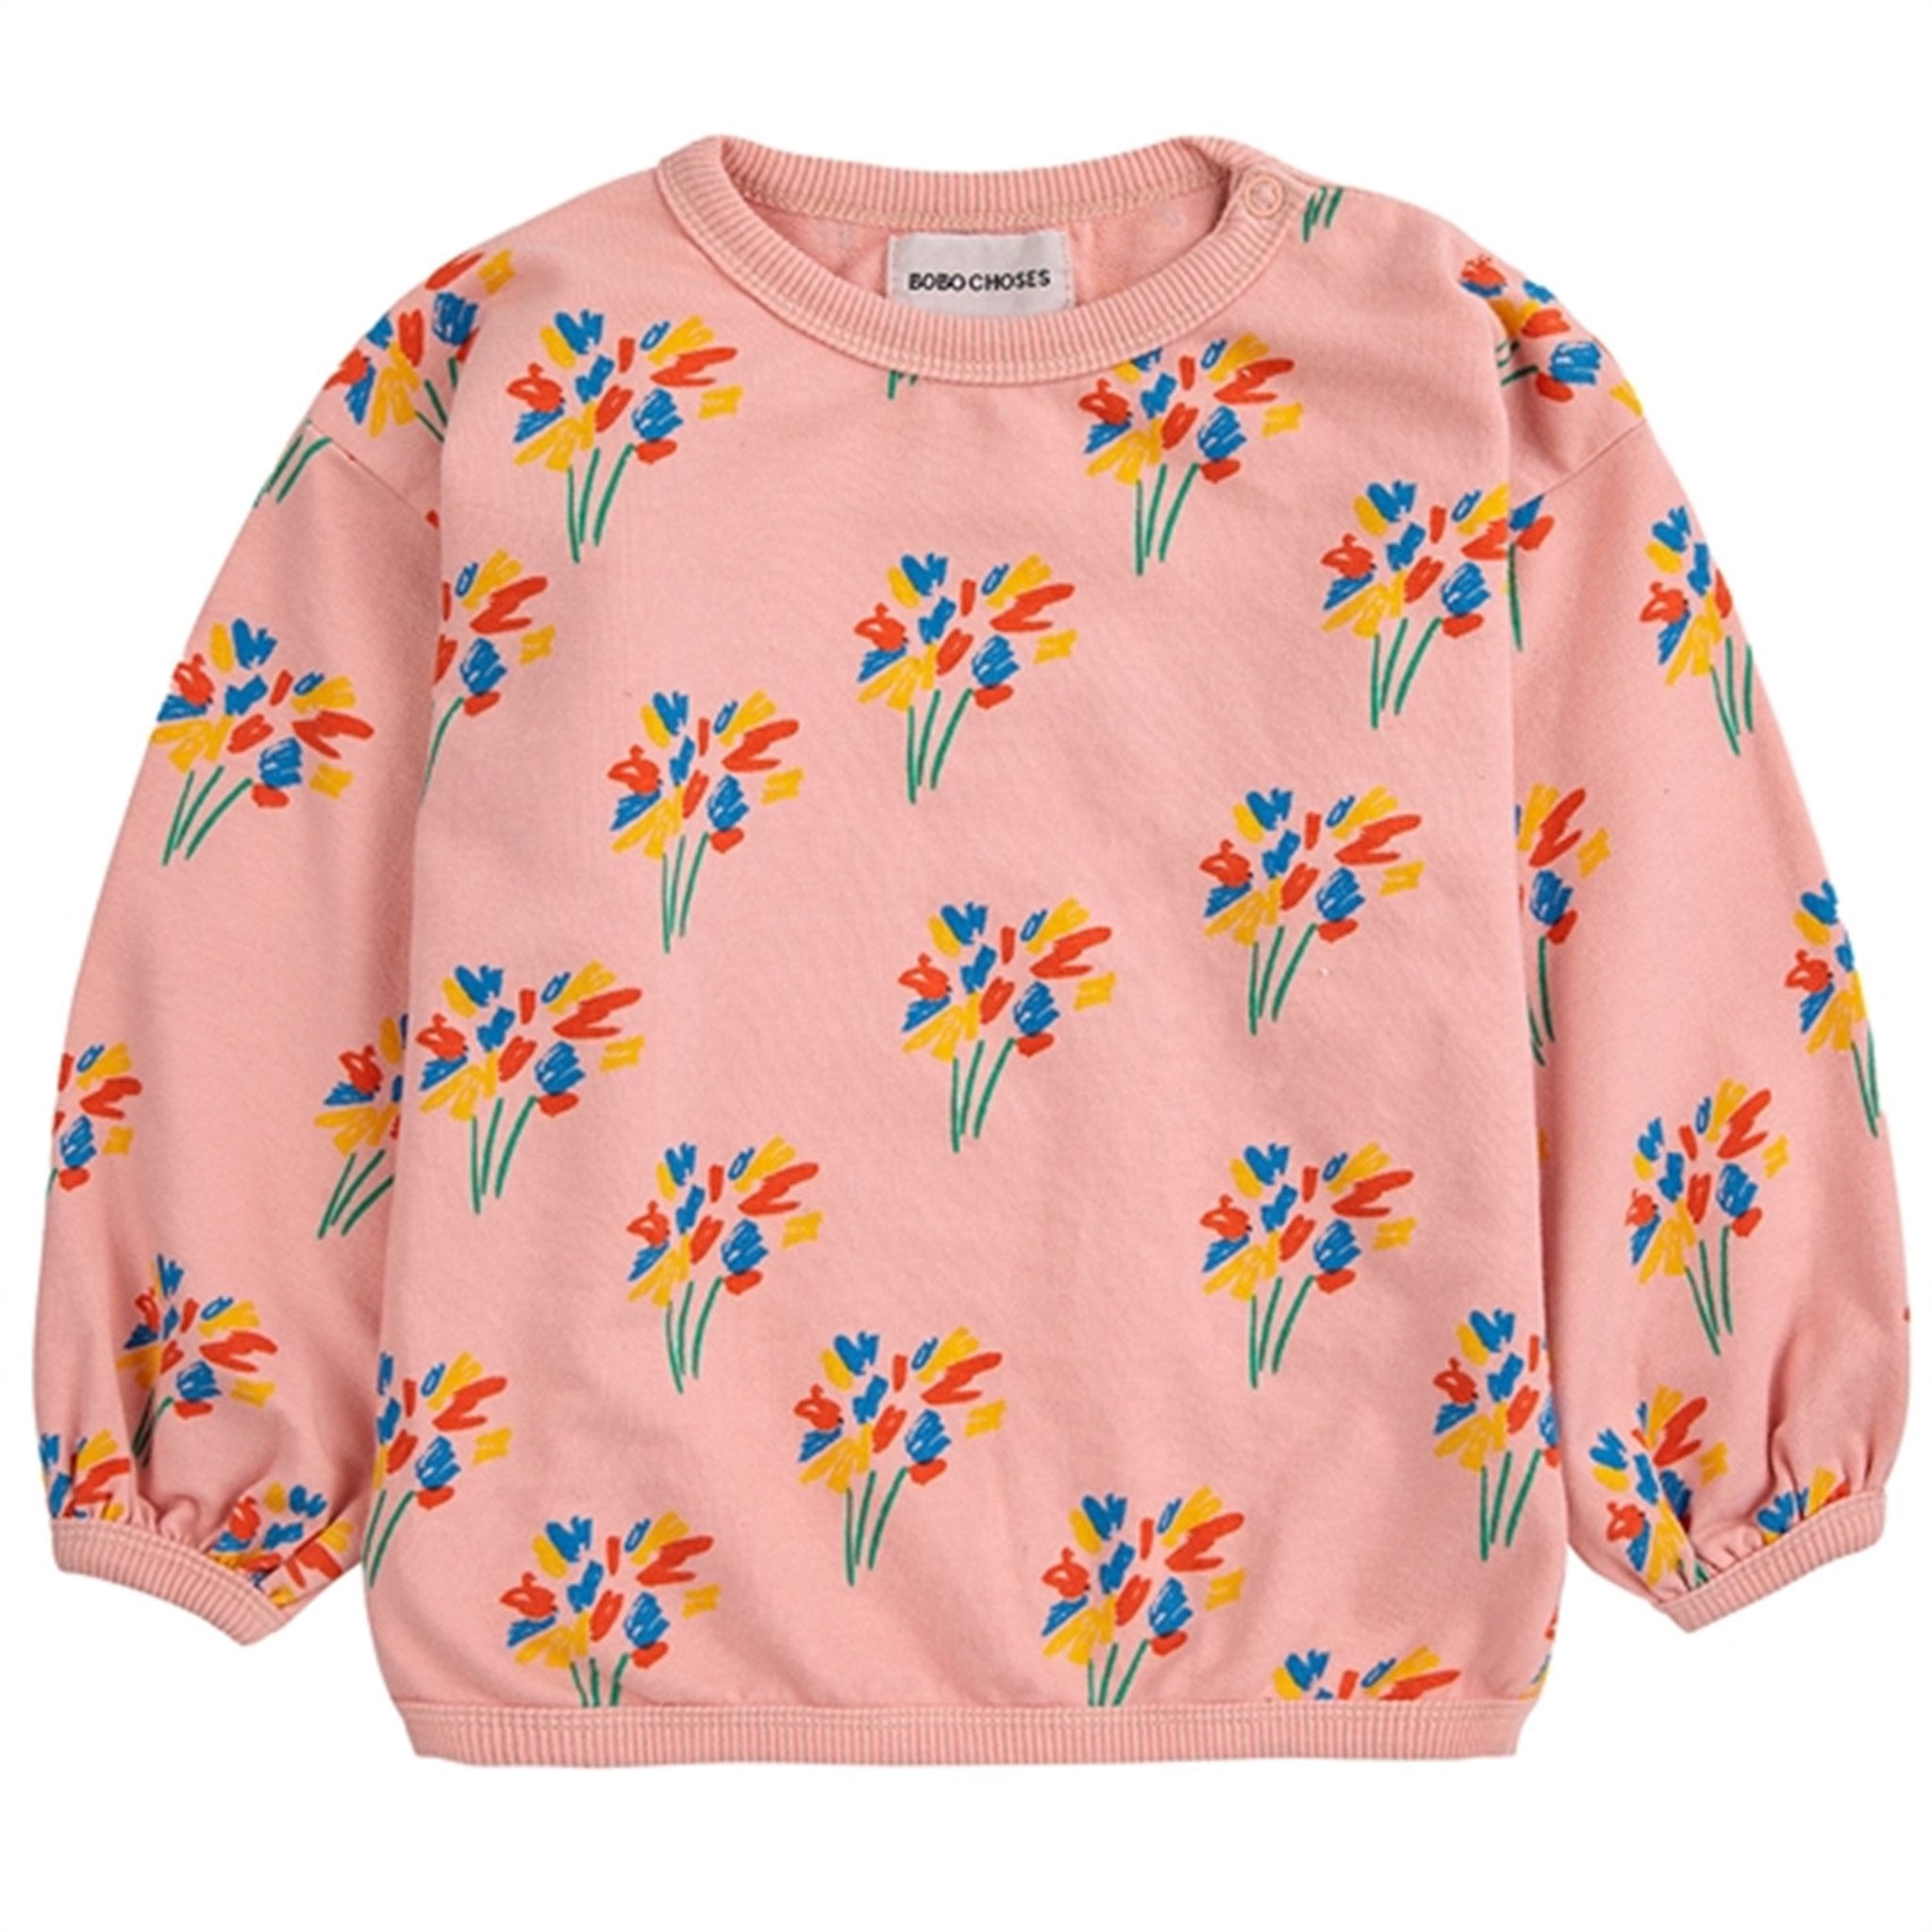 Bobo Choses Baby Fireworks All Over Sweatshirt Round Neck Pink